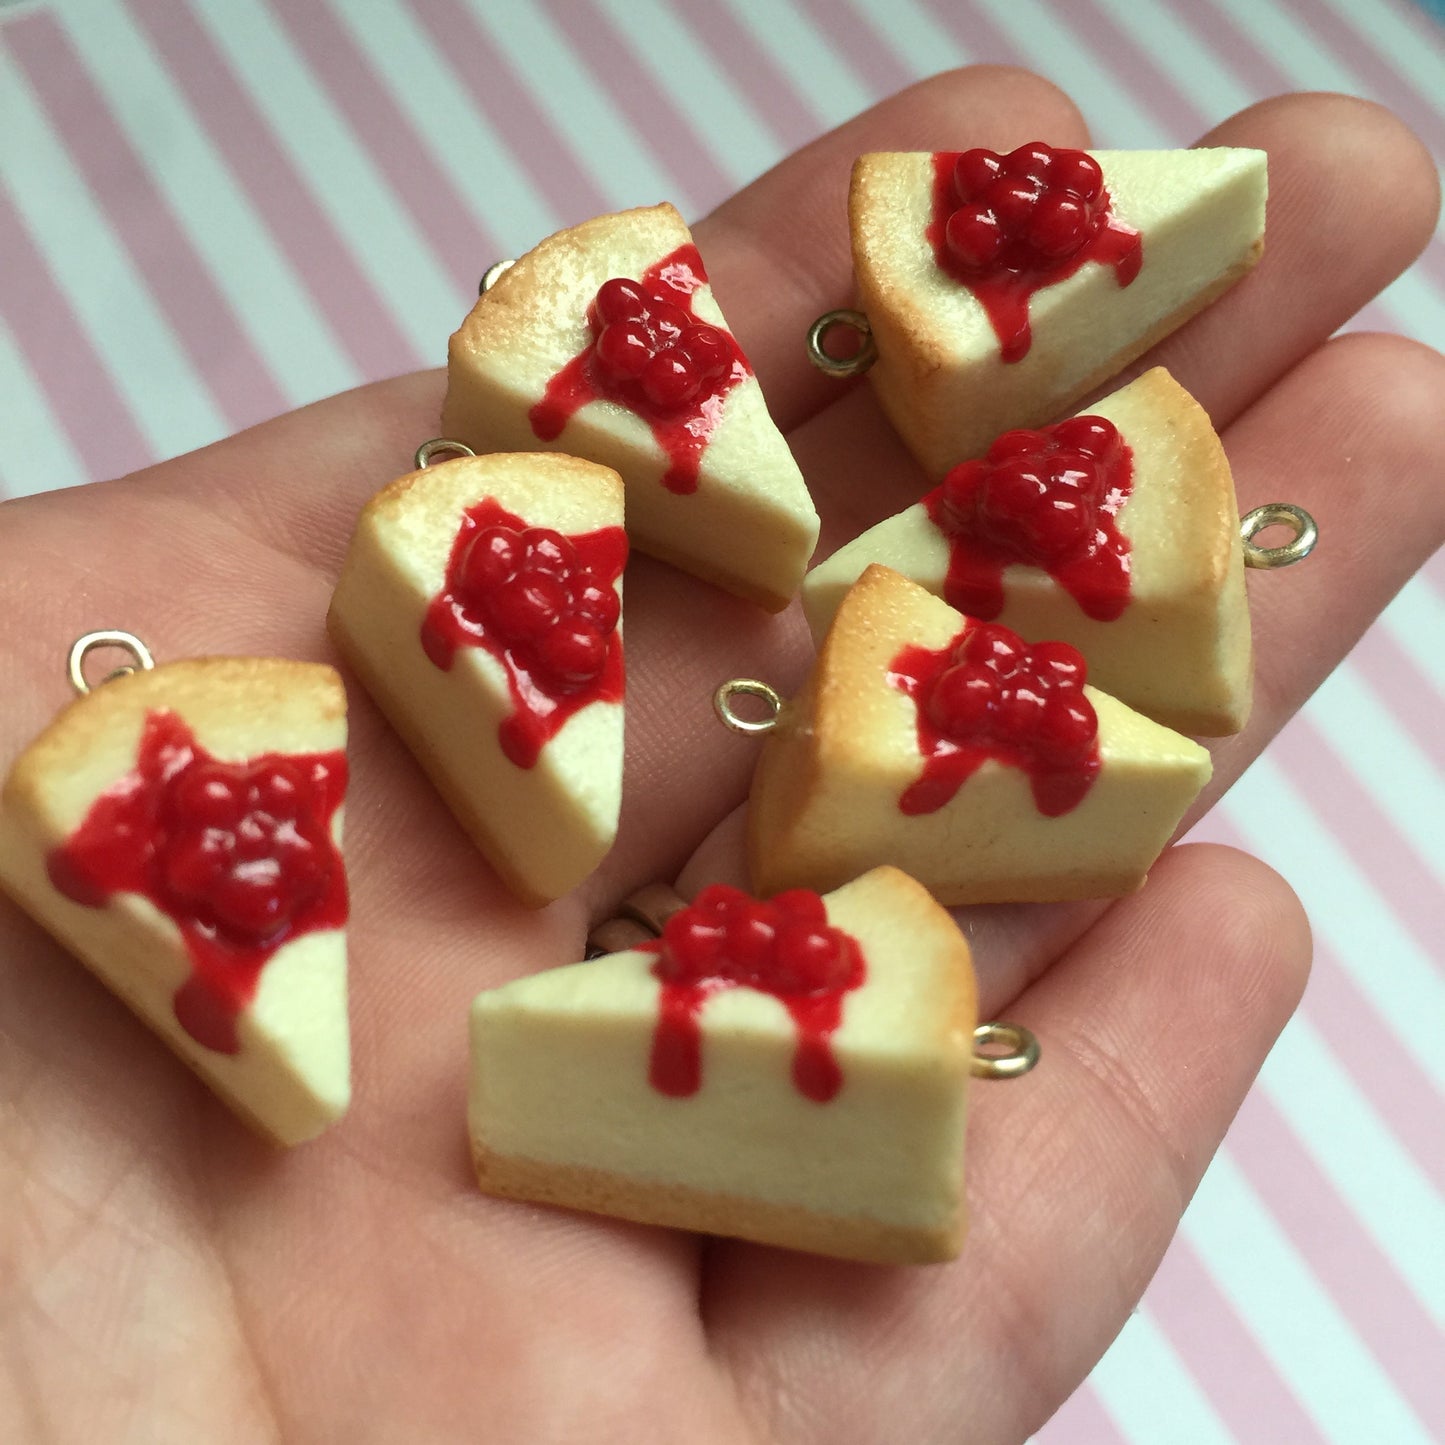 Scented Cheesecake Charm